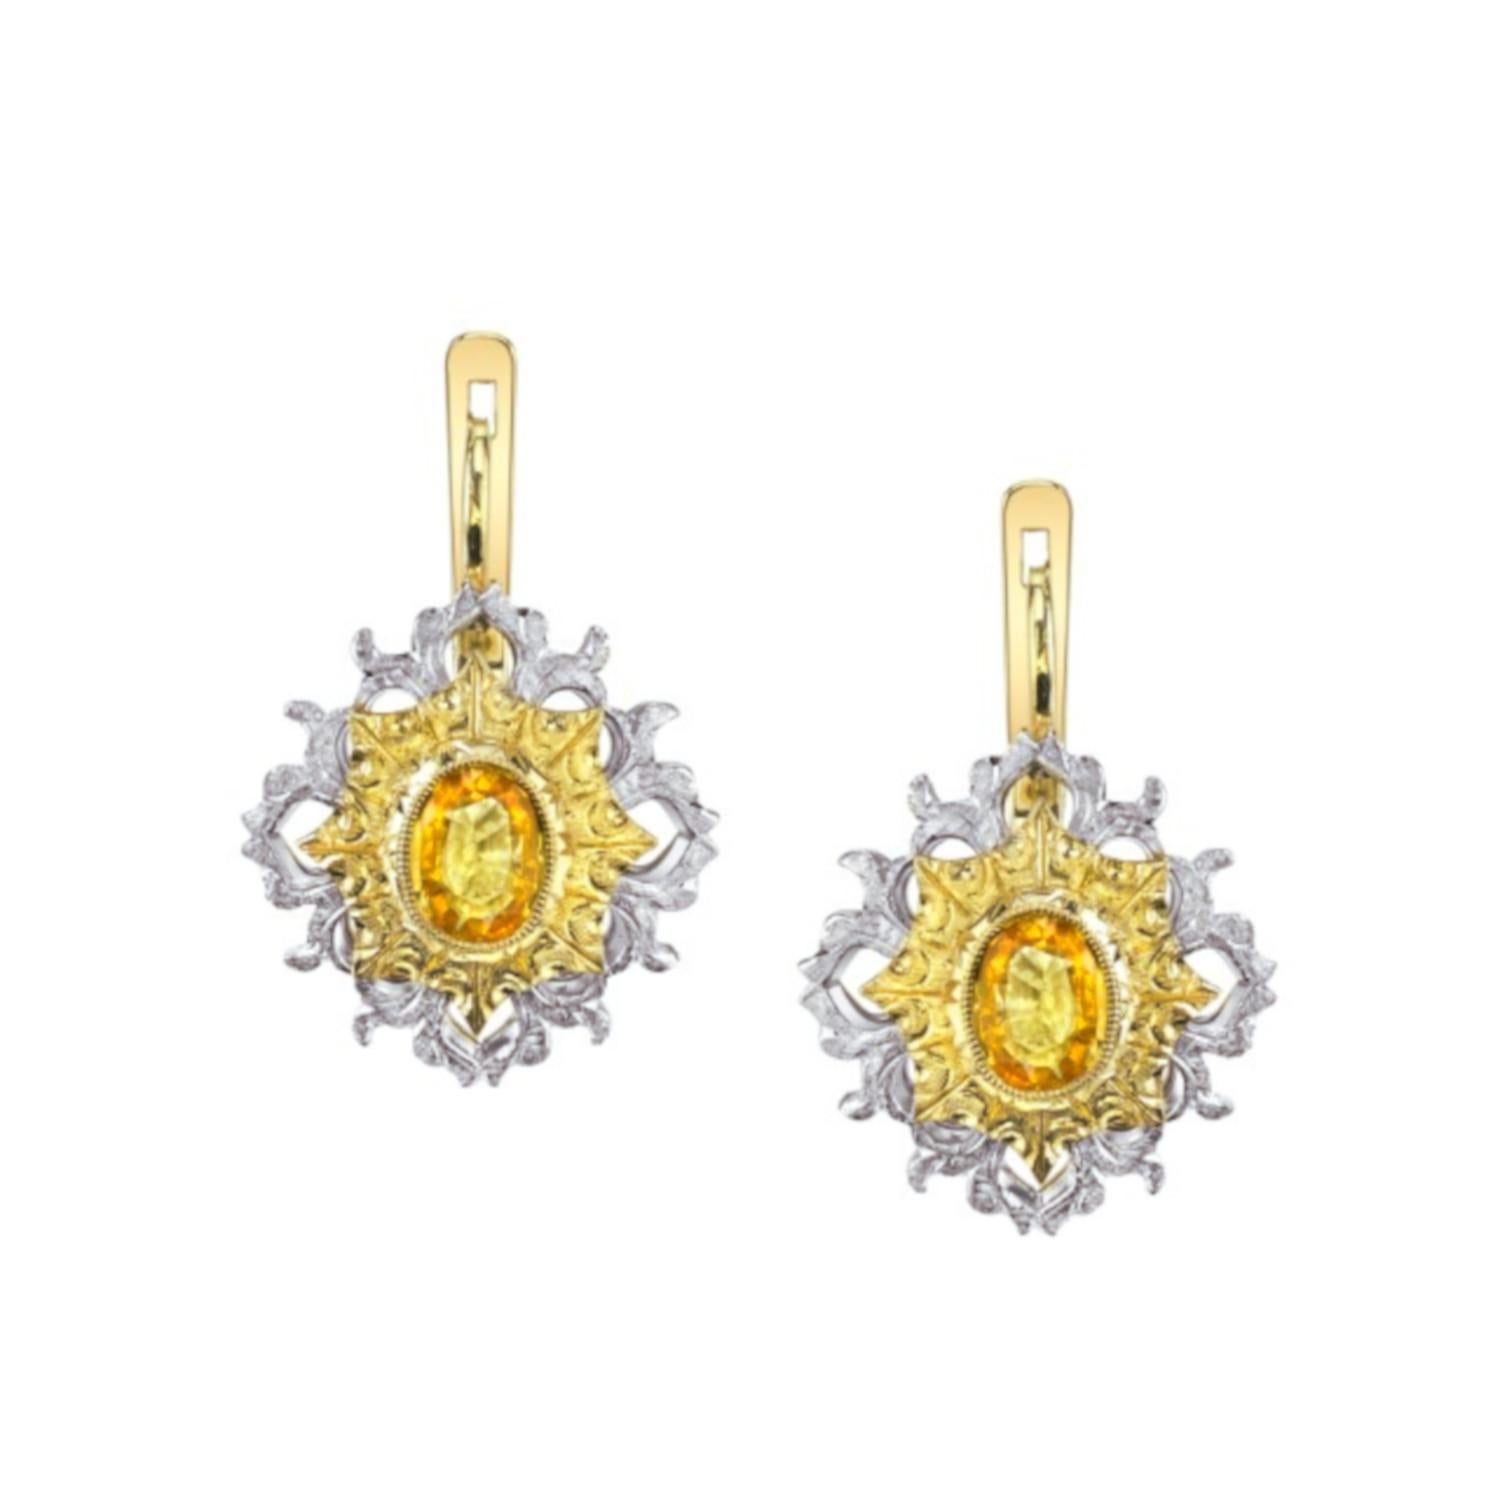 Women's Yellow Sapphire Drop Earrings in 18K White and Yellow Gold, 1.79 Carat Total For Sale